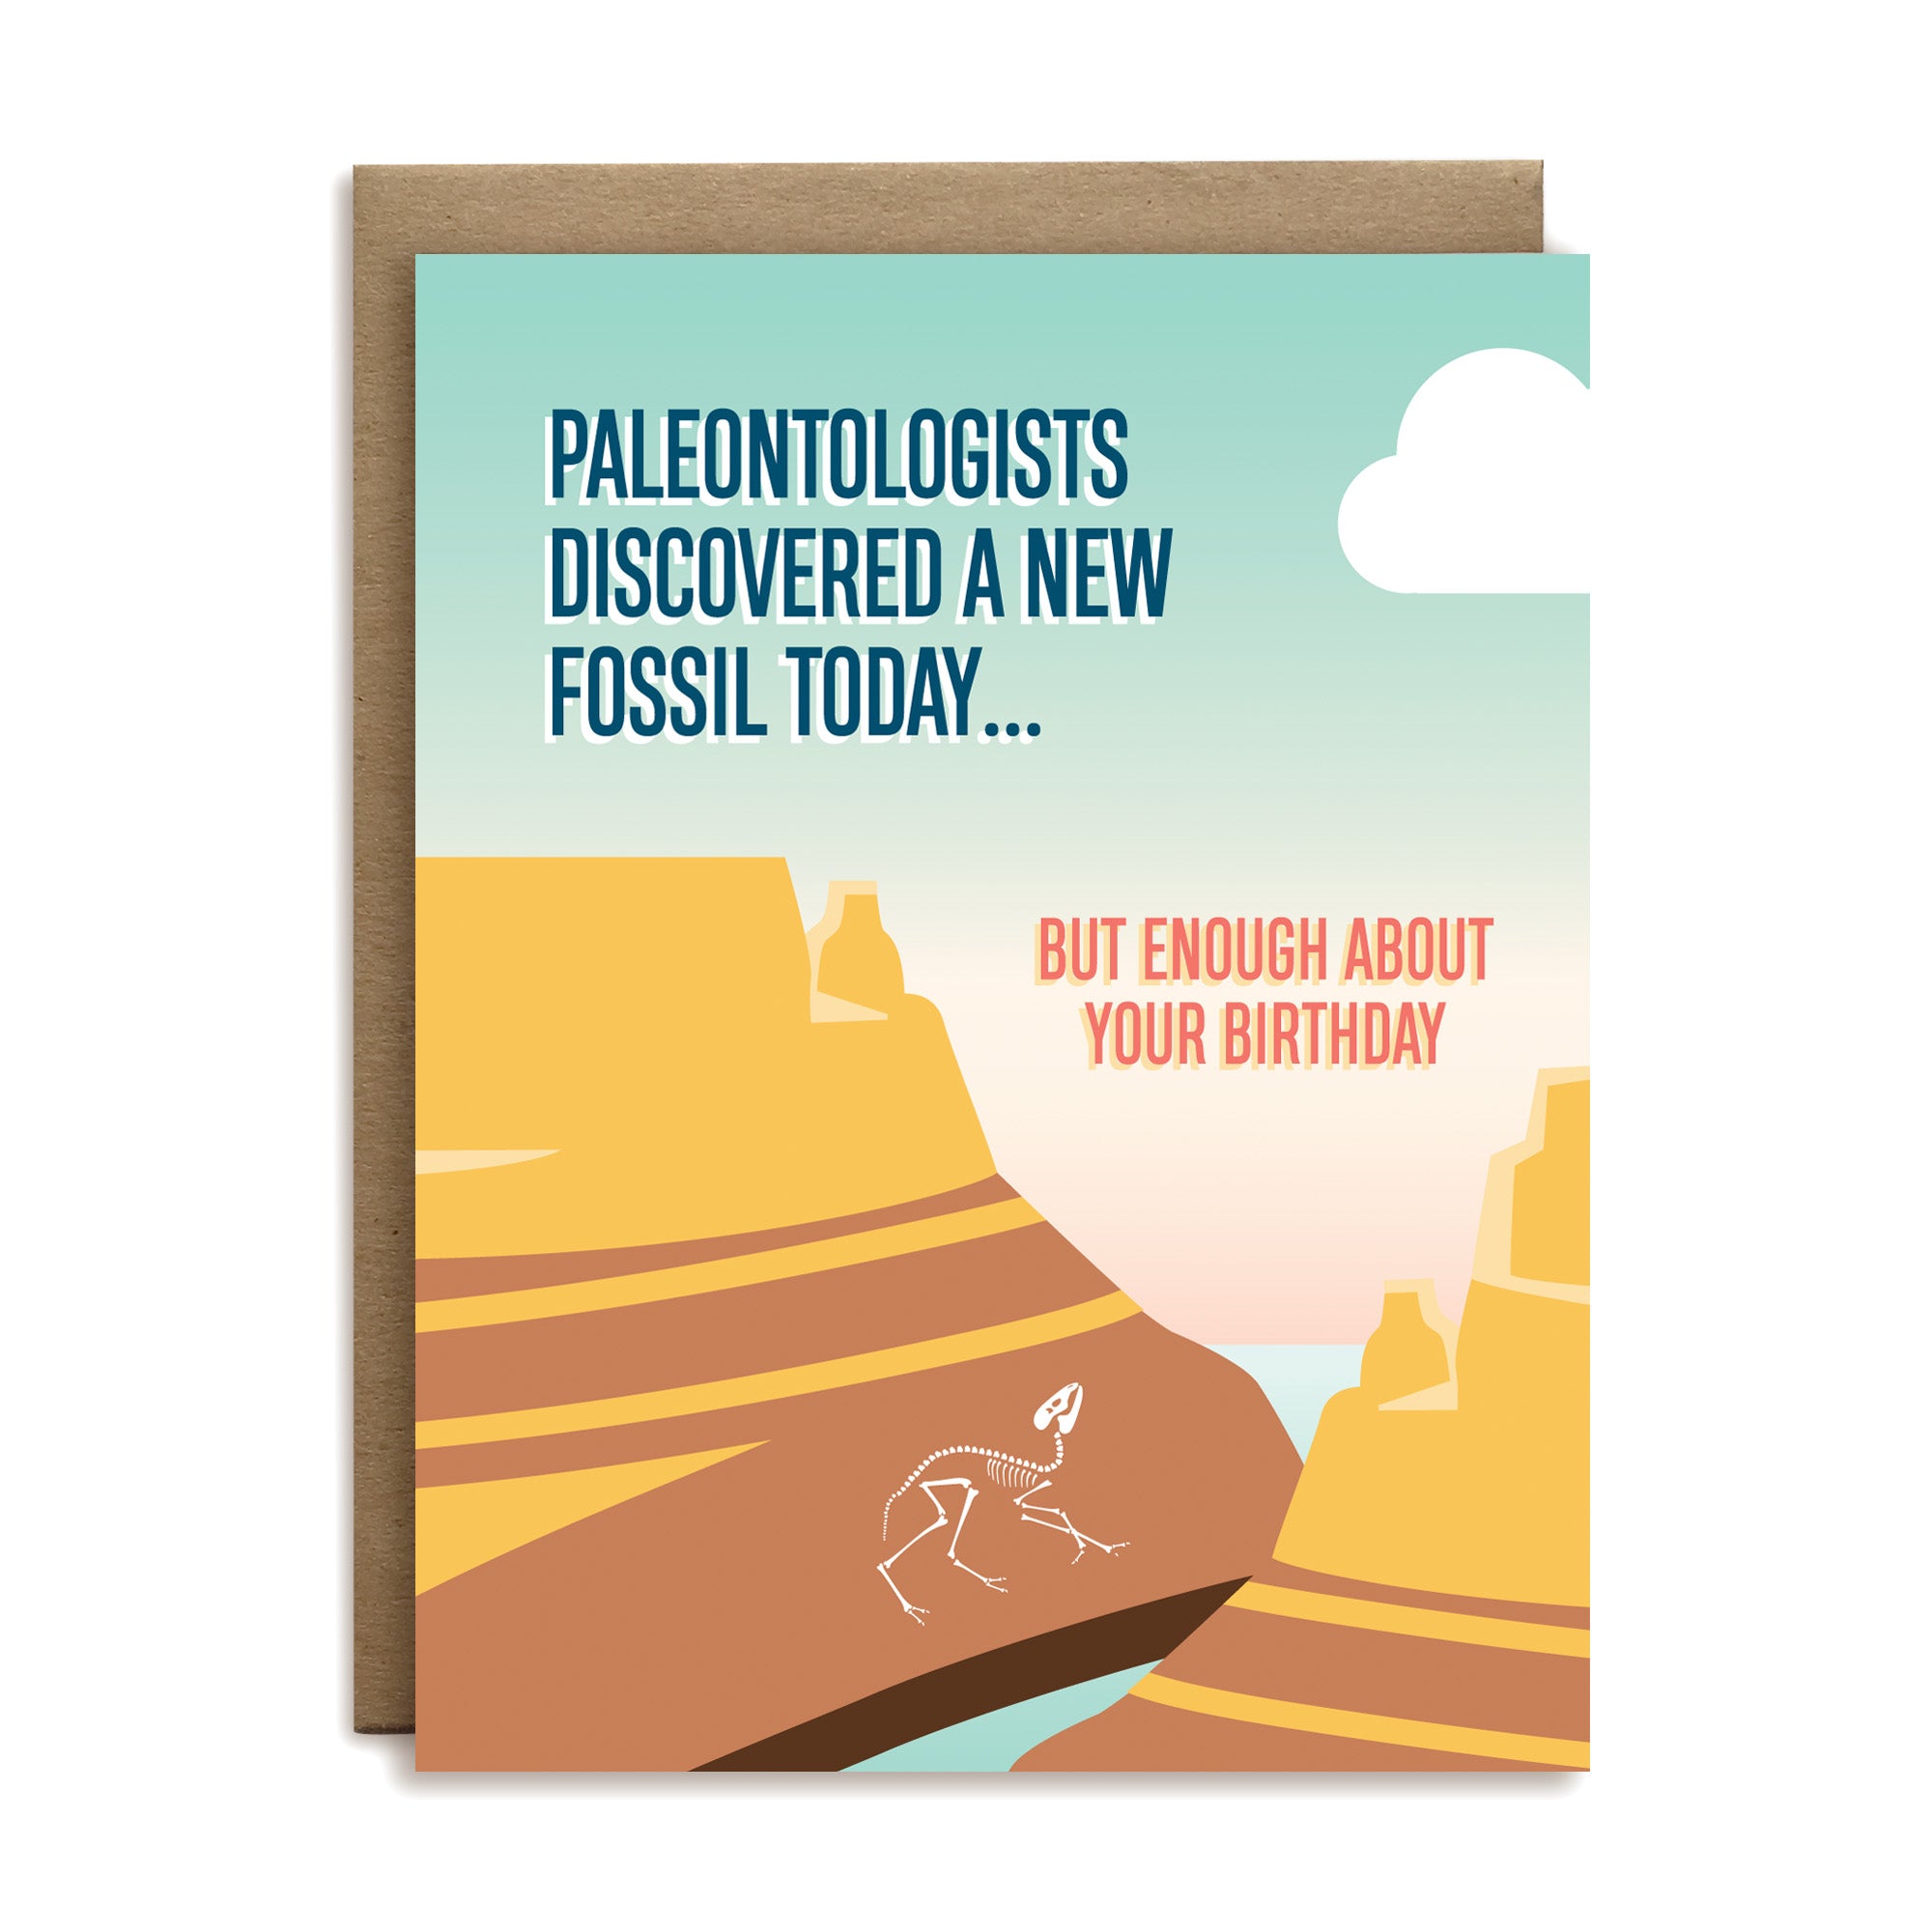 Paleontologists discovered a new fossil today... but enough about your birthday greeting card by I’ll Know It When I See It